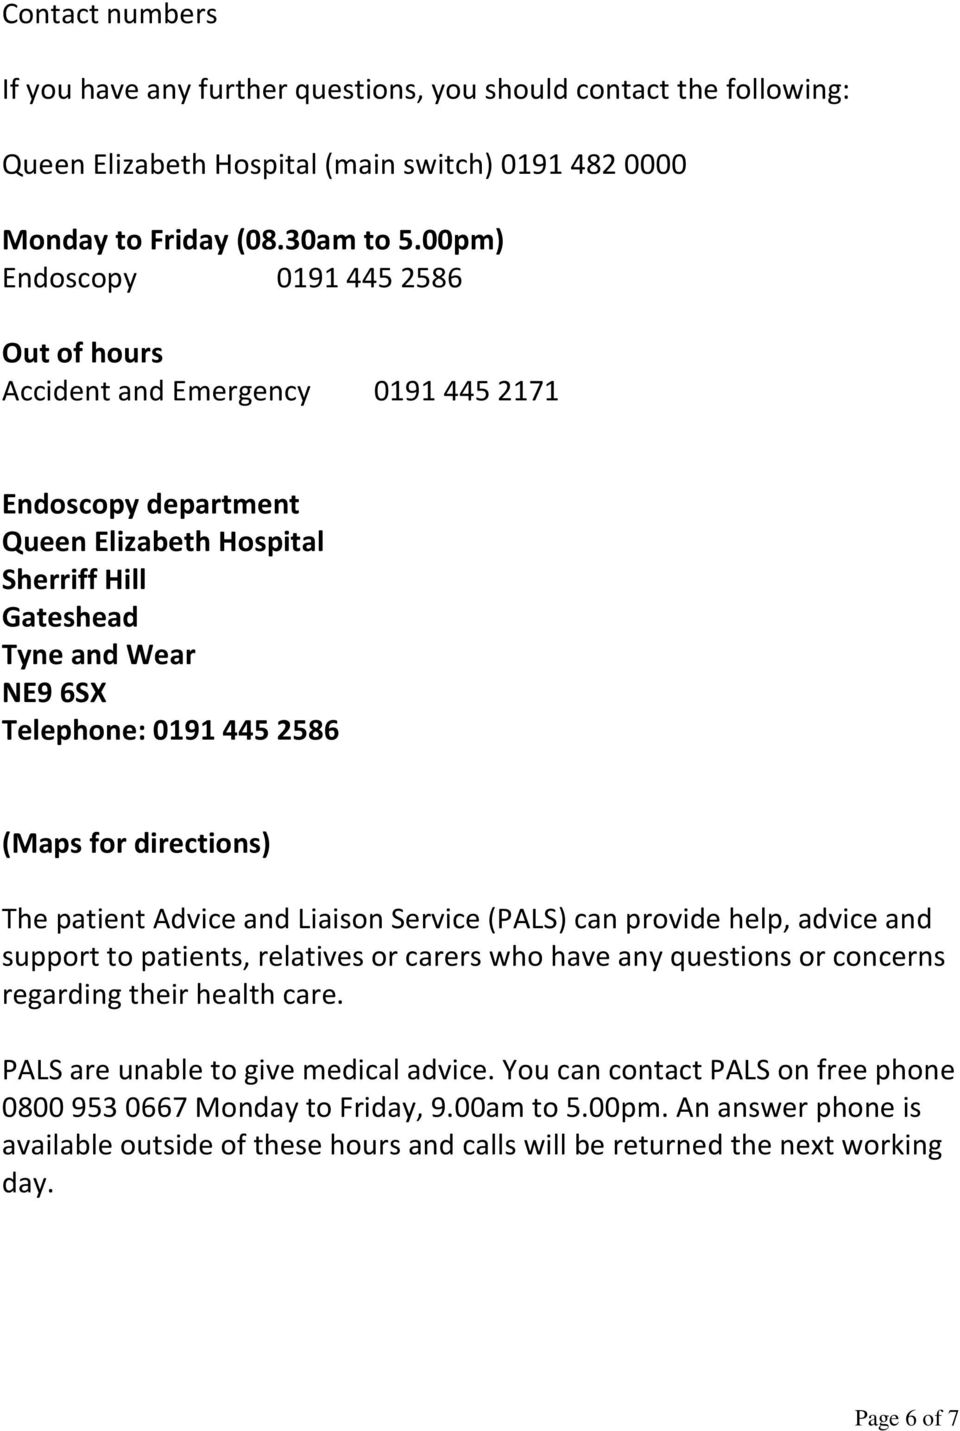 (Maps for directions) The patient Advice and Liaison Service (PALS) can provide help, advice and support to patients, relatives or carers who have any questions or concerns regarding their health